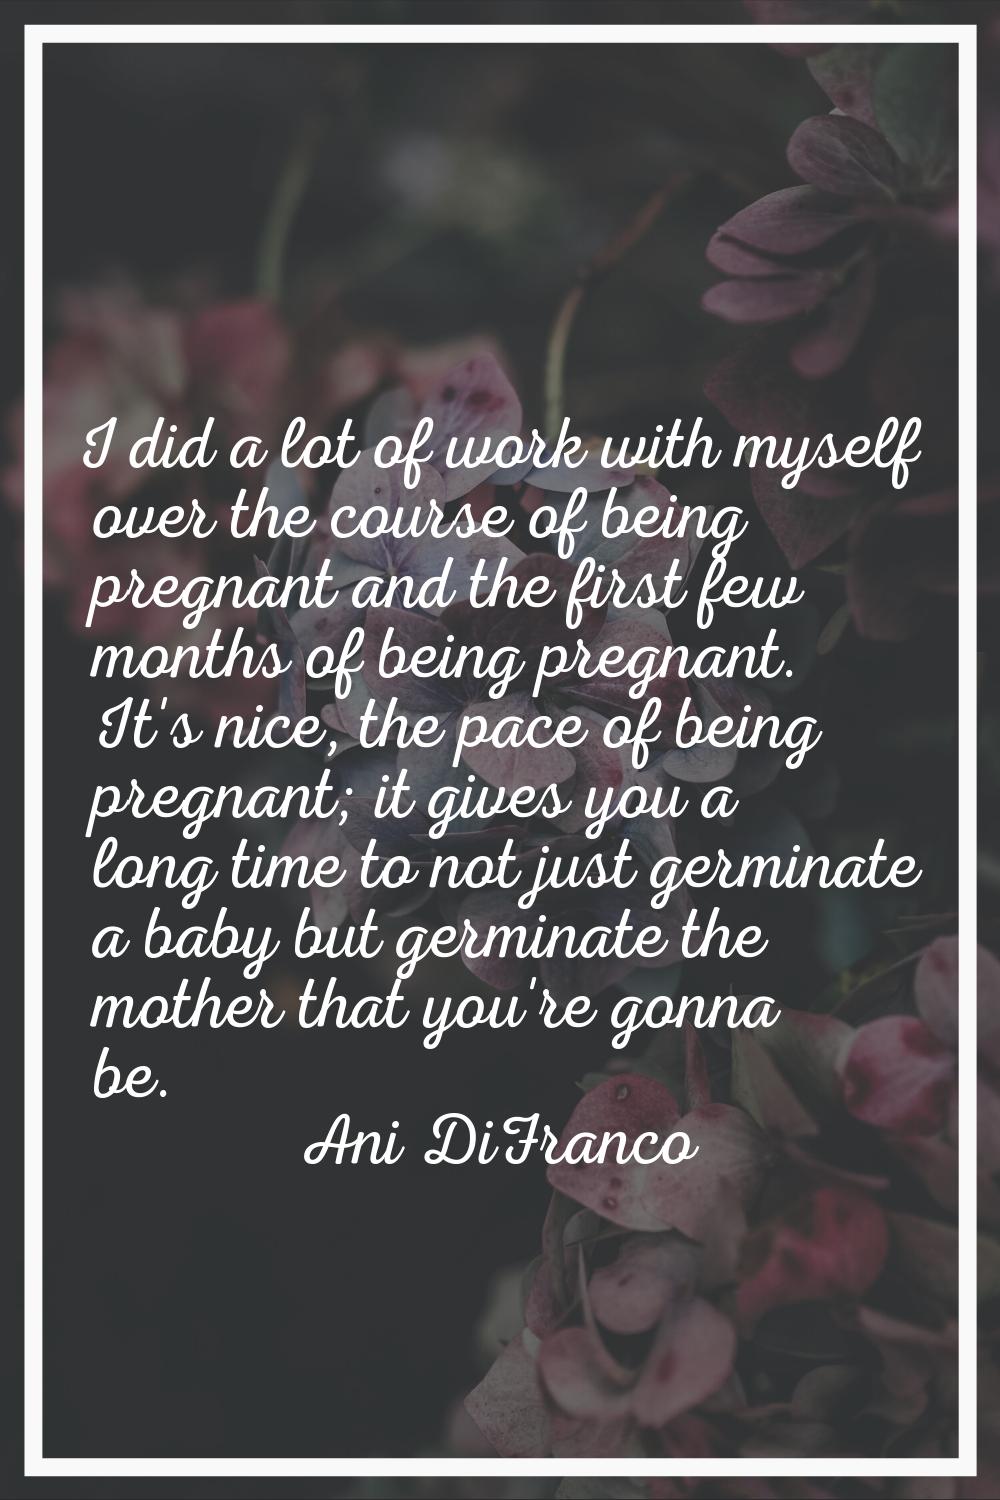 I did a lot of work with myself over the course of being pregnant and the first few months of being